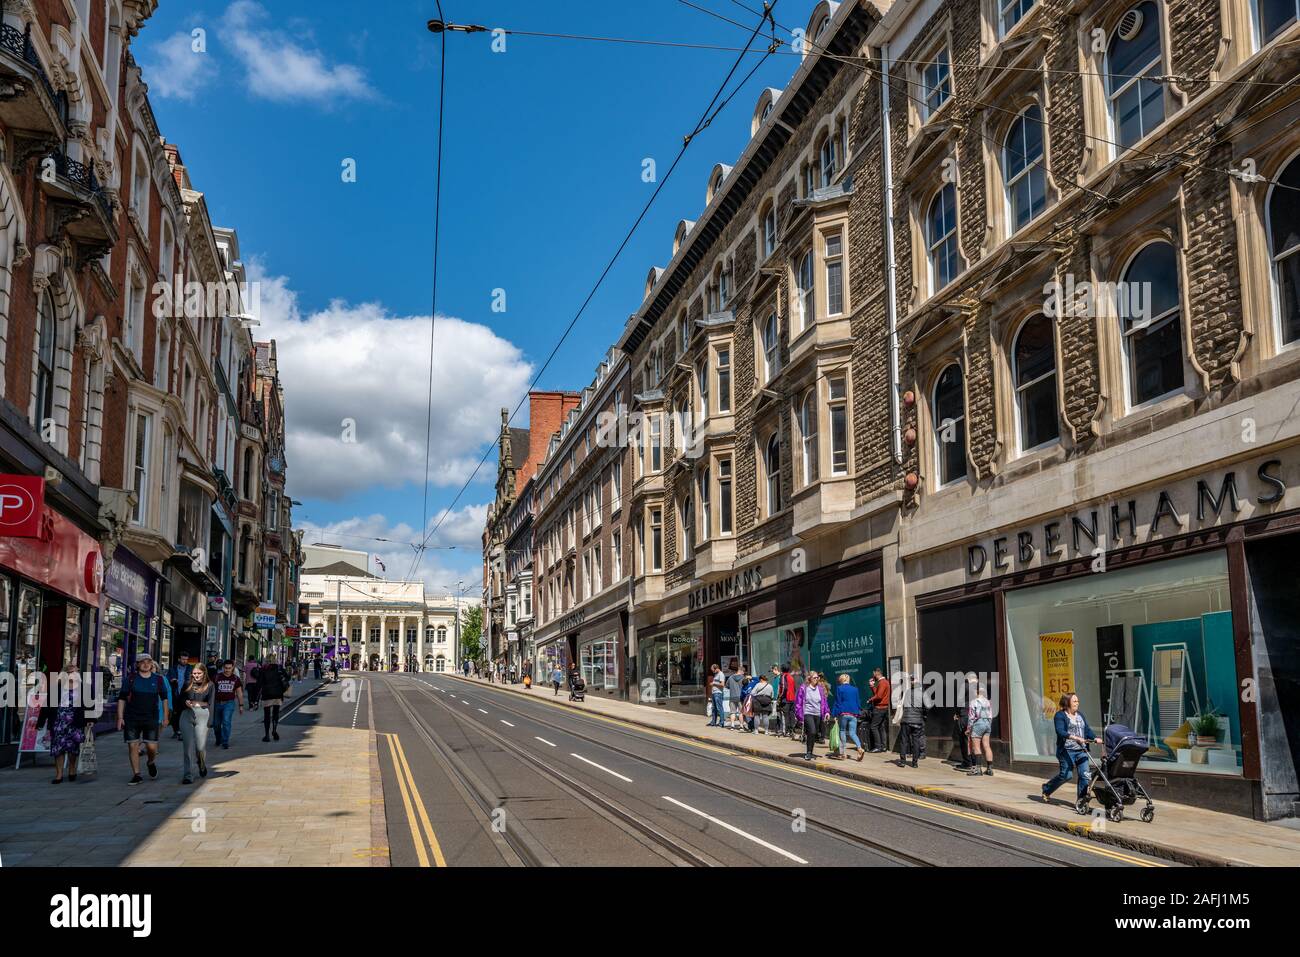 NOTTINGHAM, UNITED KINGDOM - AUGUST 15: This is a high street in the town centre of Nottingham outside the old market square on August 15, 2019 in Not Stock Photo